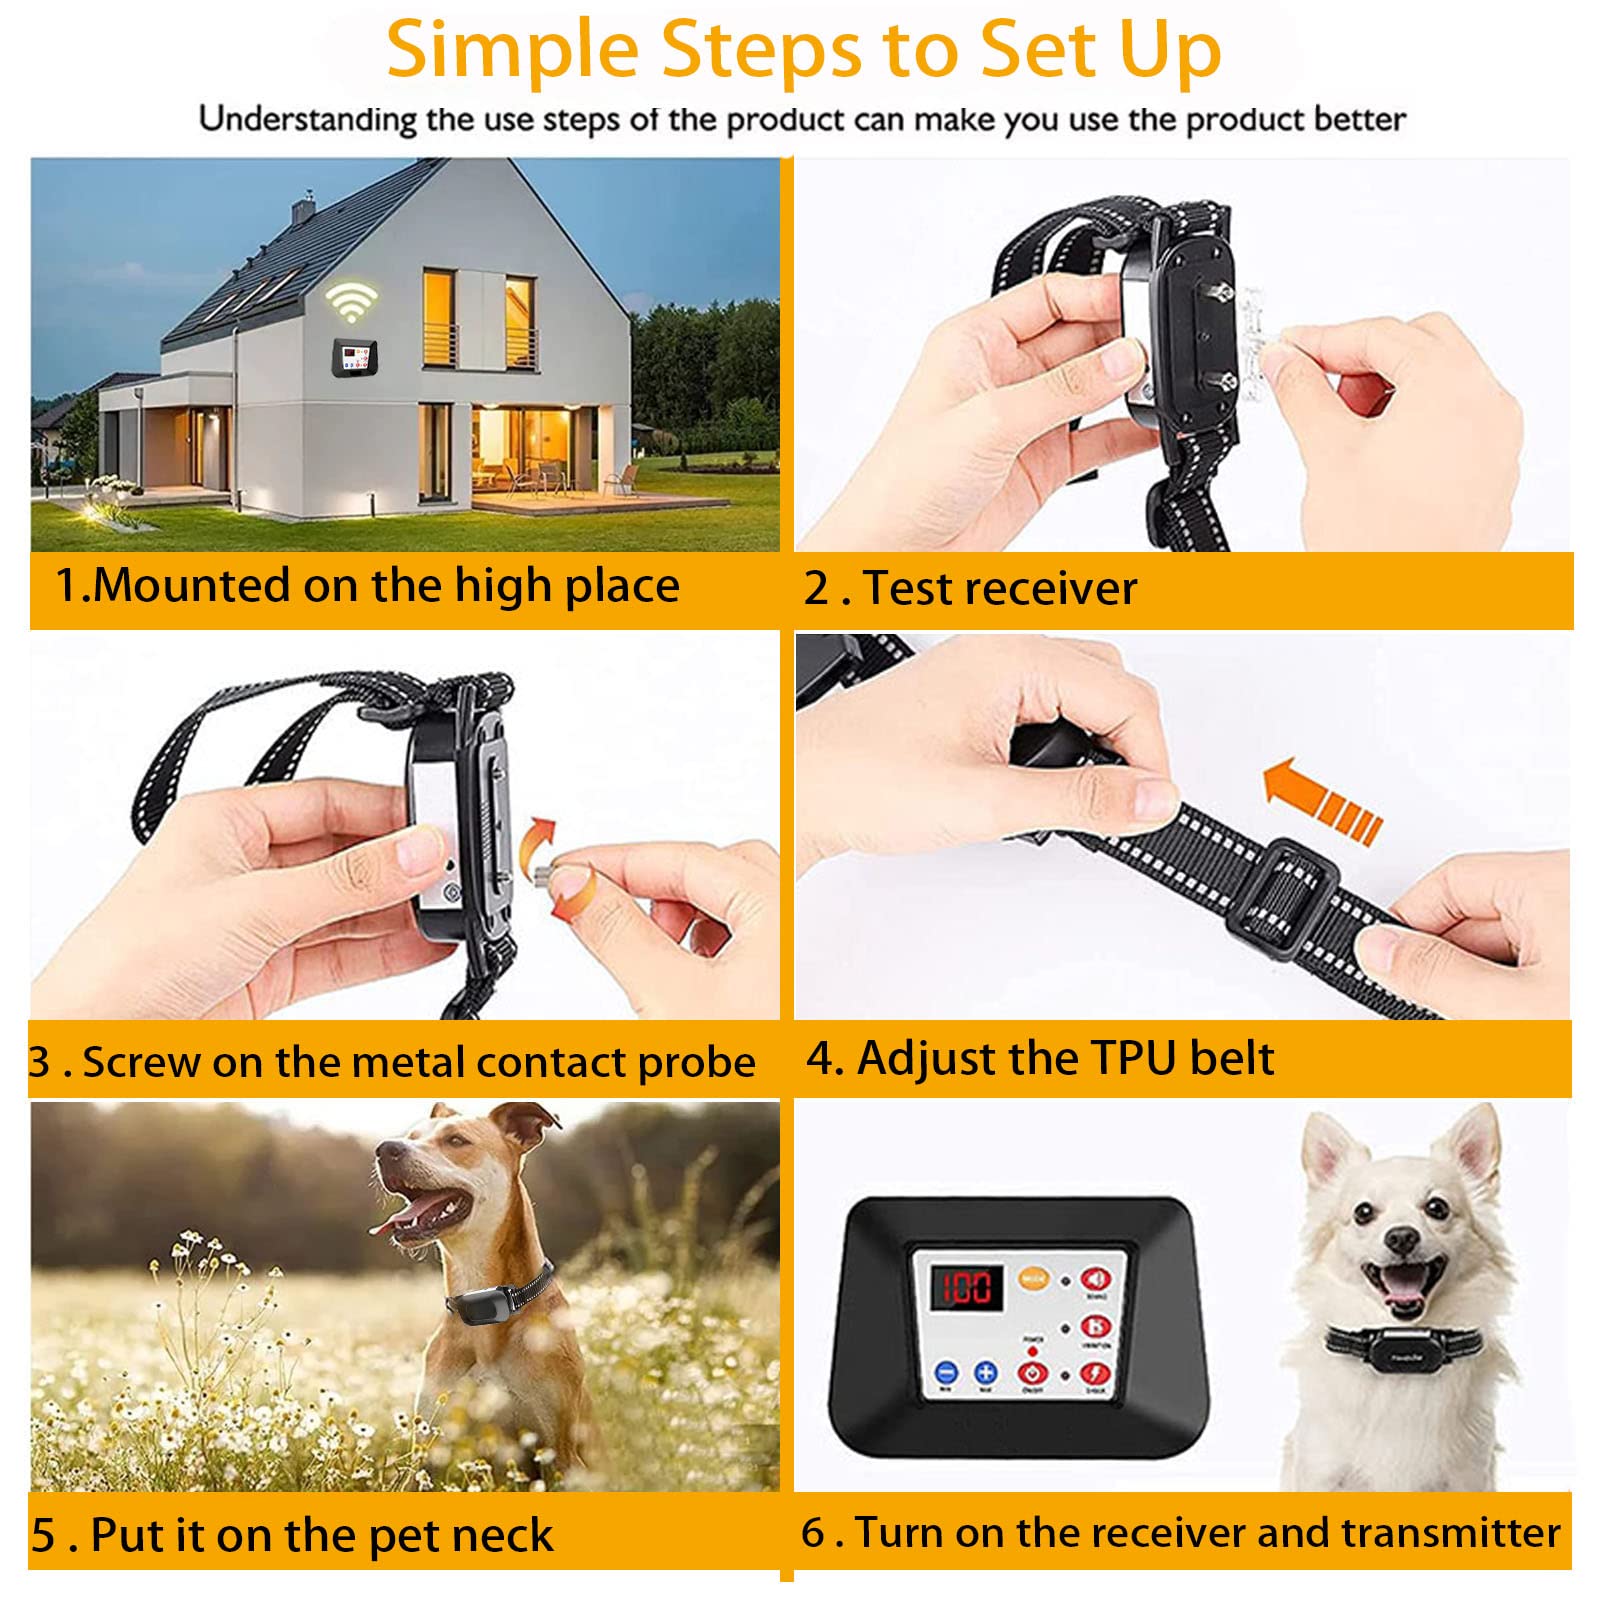 HEXIEDEN Wireless Dog Fence,Pet Containment System,Electric Dog Training Collar with Remote Dog Boundary System,Reflective Stripe,Waterproof,Adjustable Range,Harmless,for 1 2 3 Dogs,for3dogs